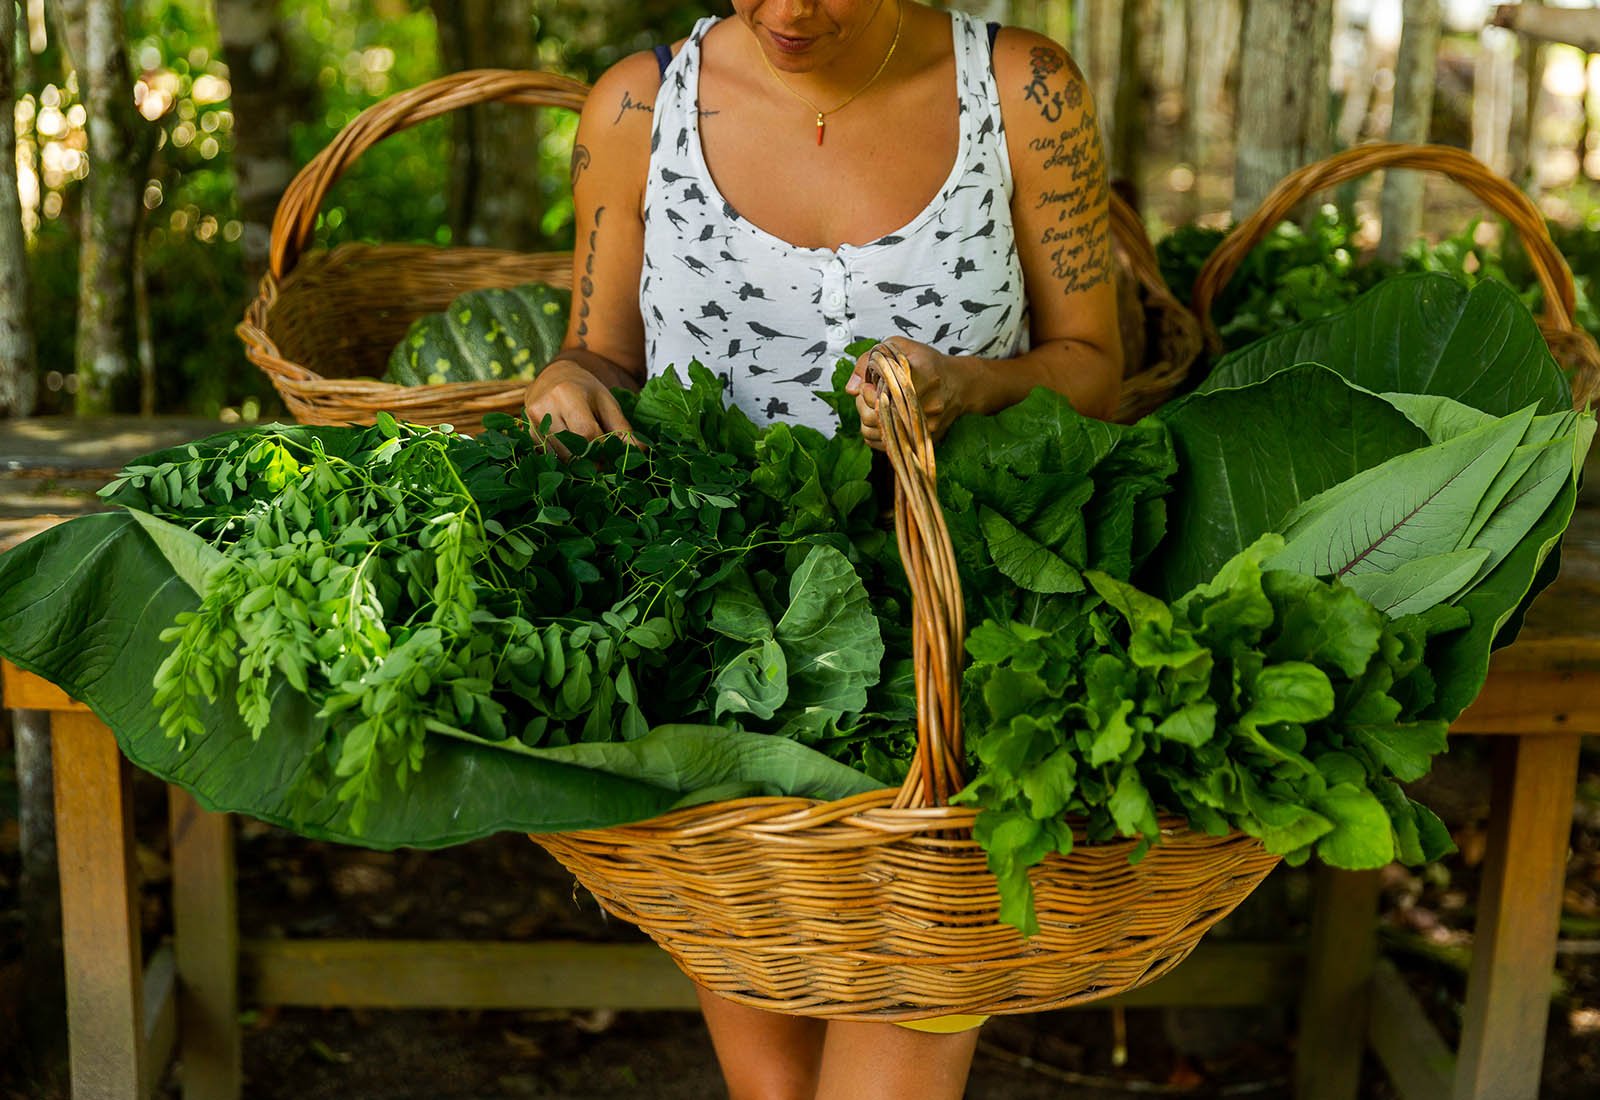 Organic producers from all over Brazil will unite at the festival